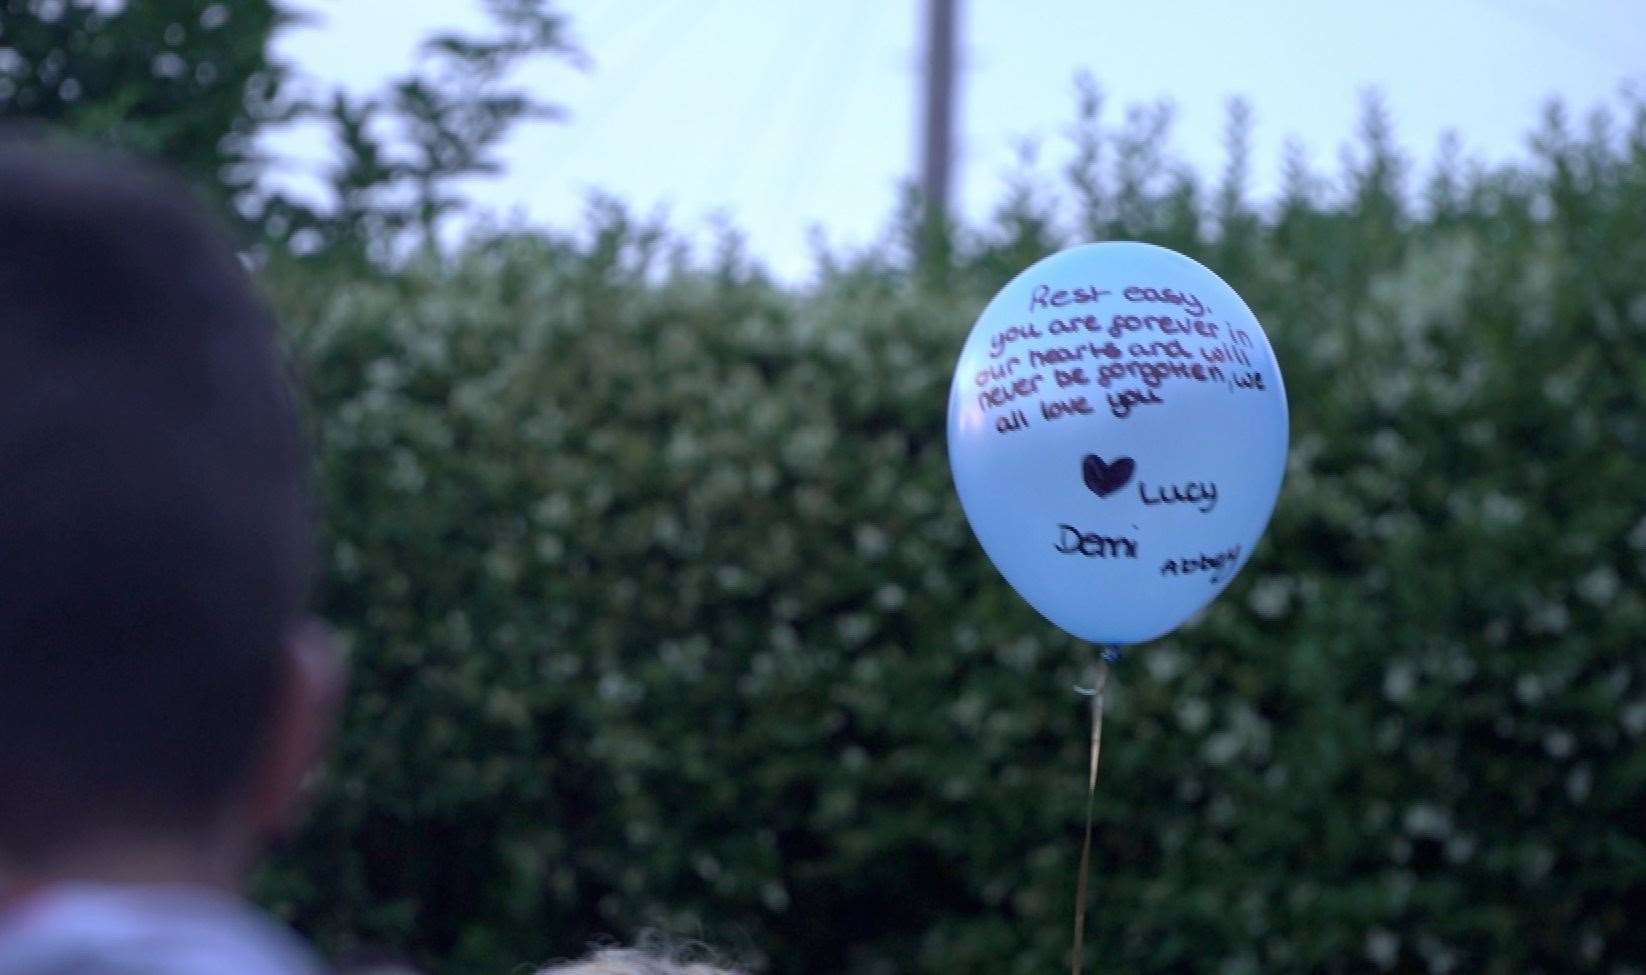 A message written on one of the balloons